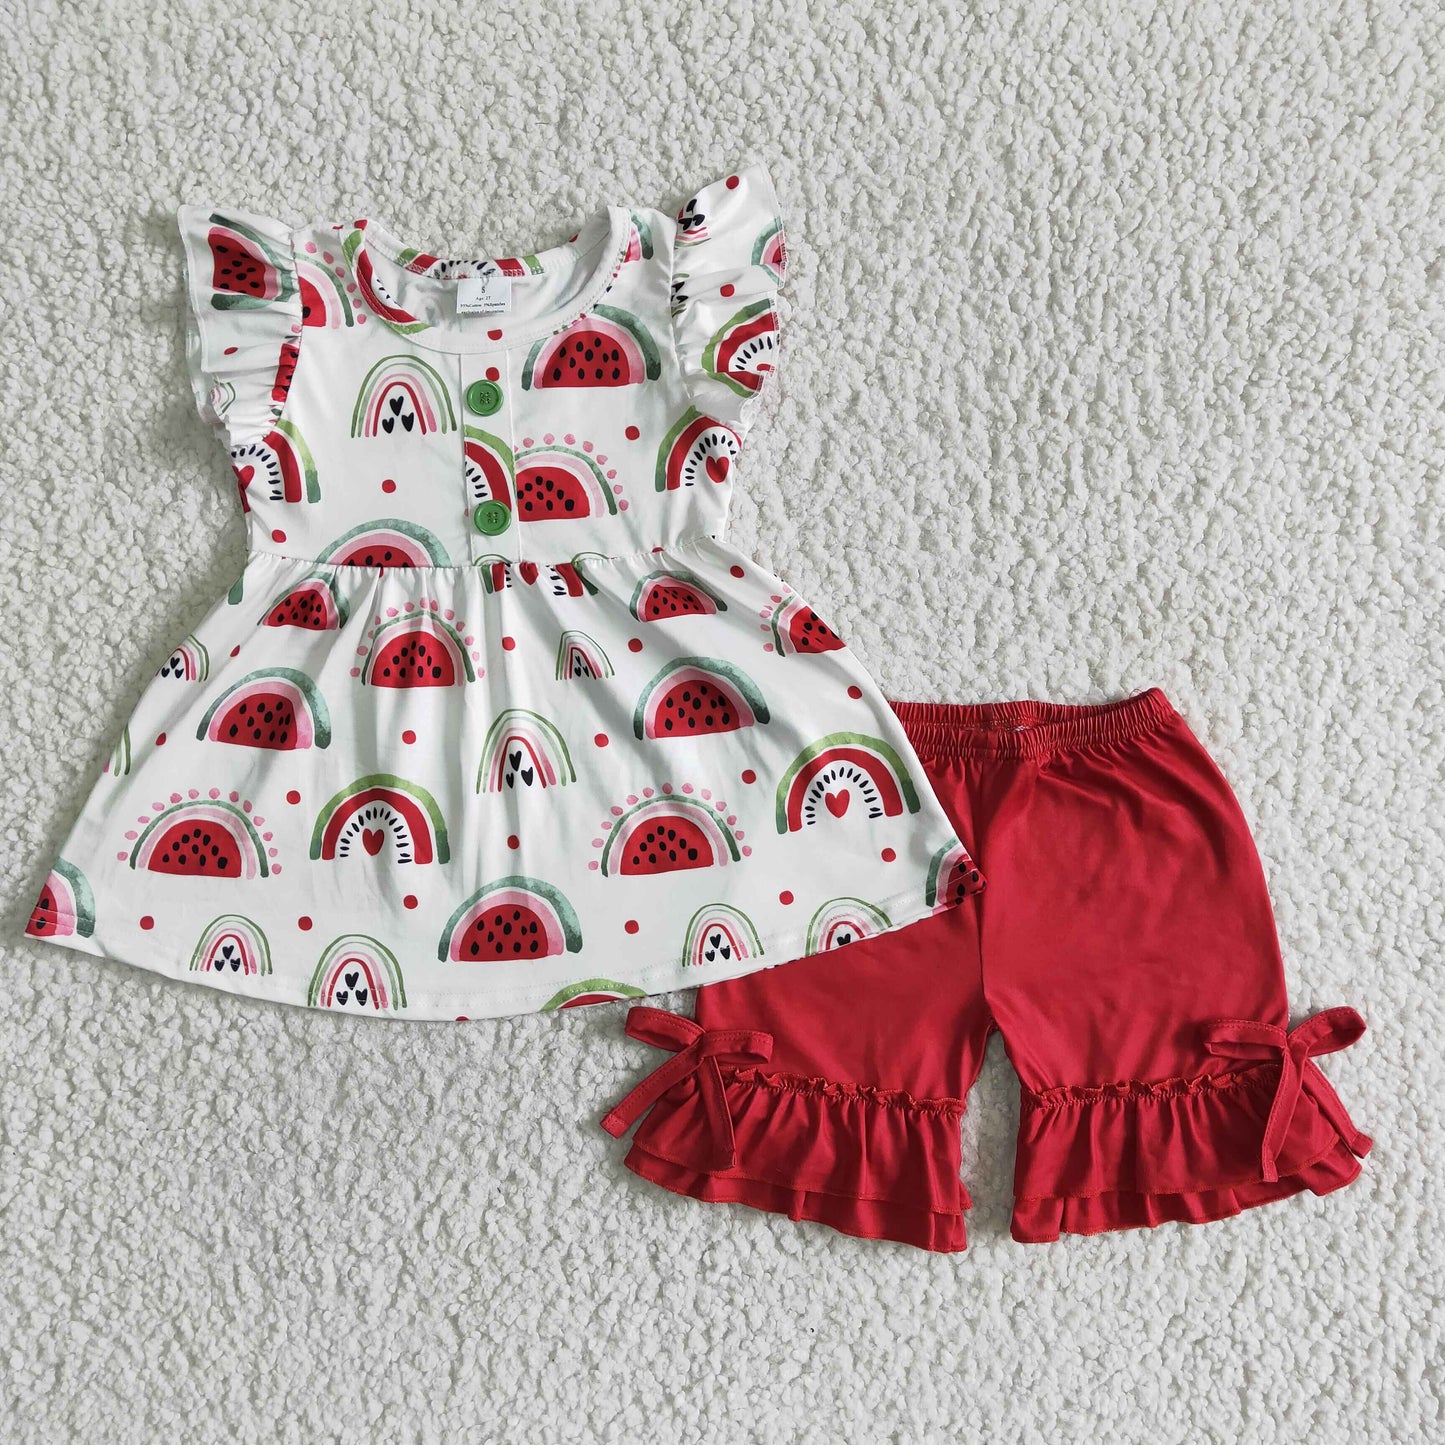 girl’s watermelon rainbow red ruffle shorts set outfit clothing